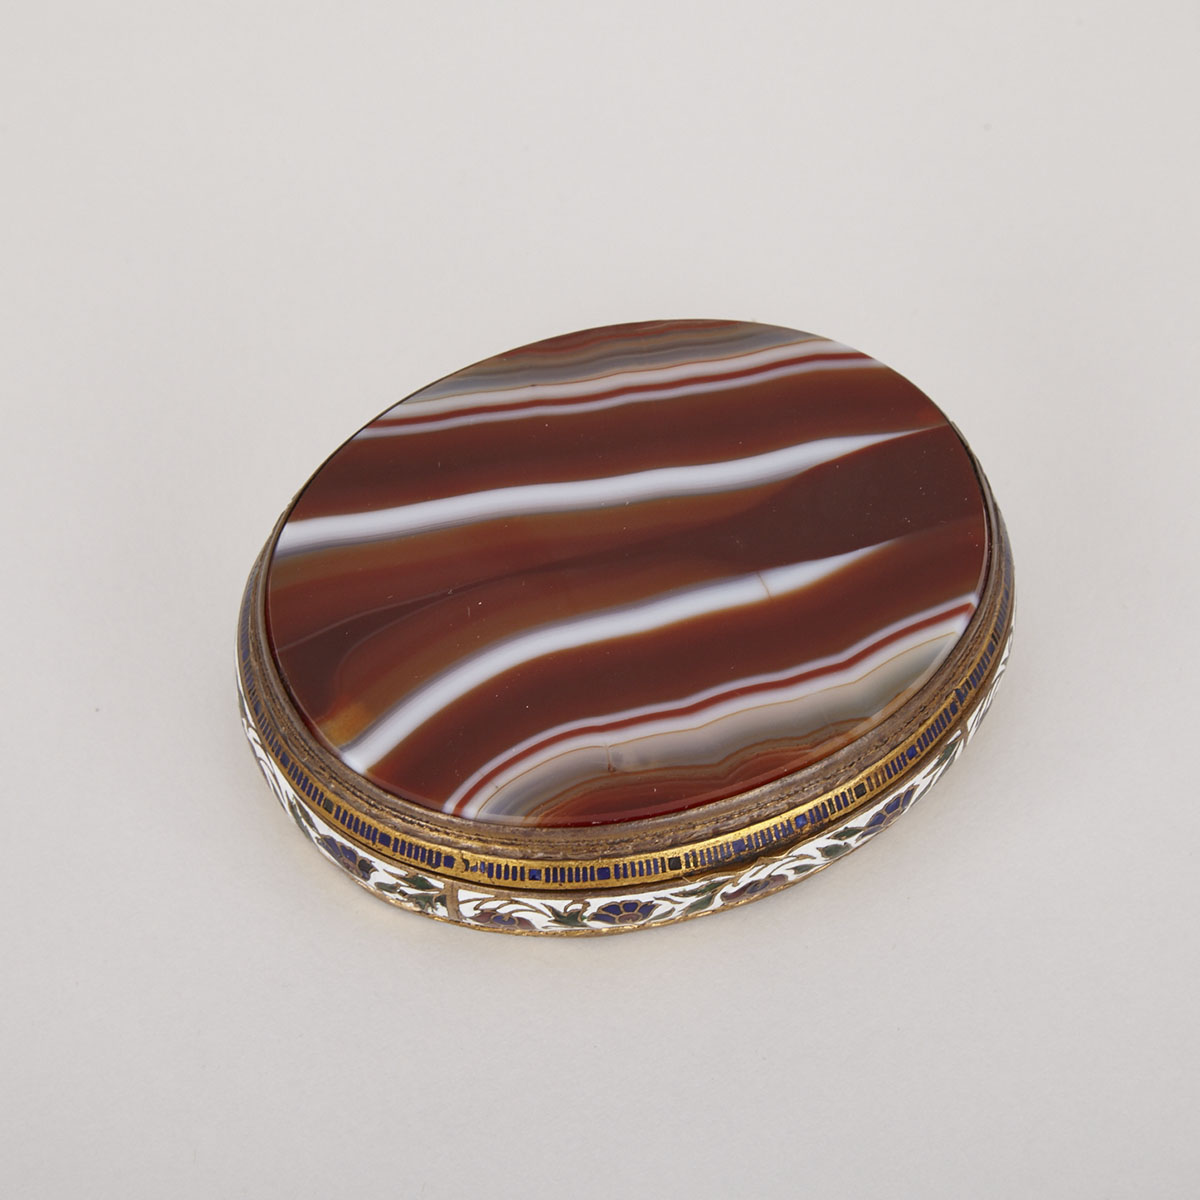 Oval Agate and Champleve Enamelled Box, early 20th century